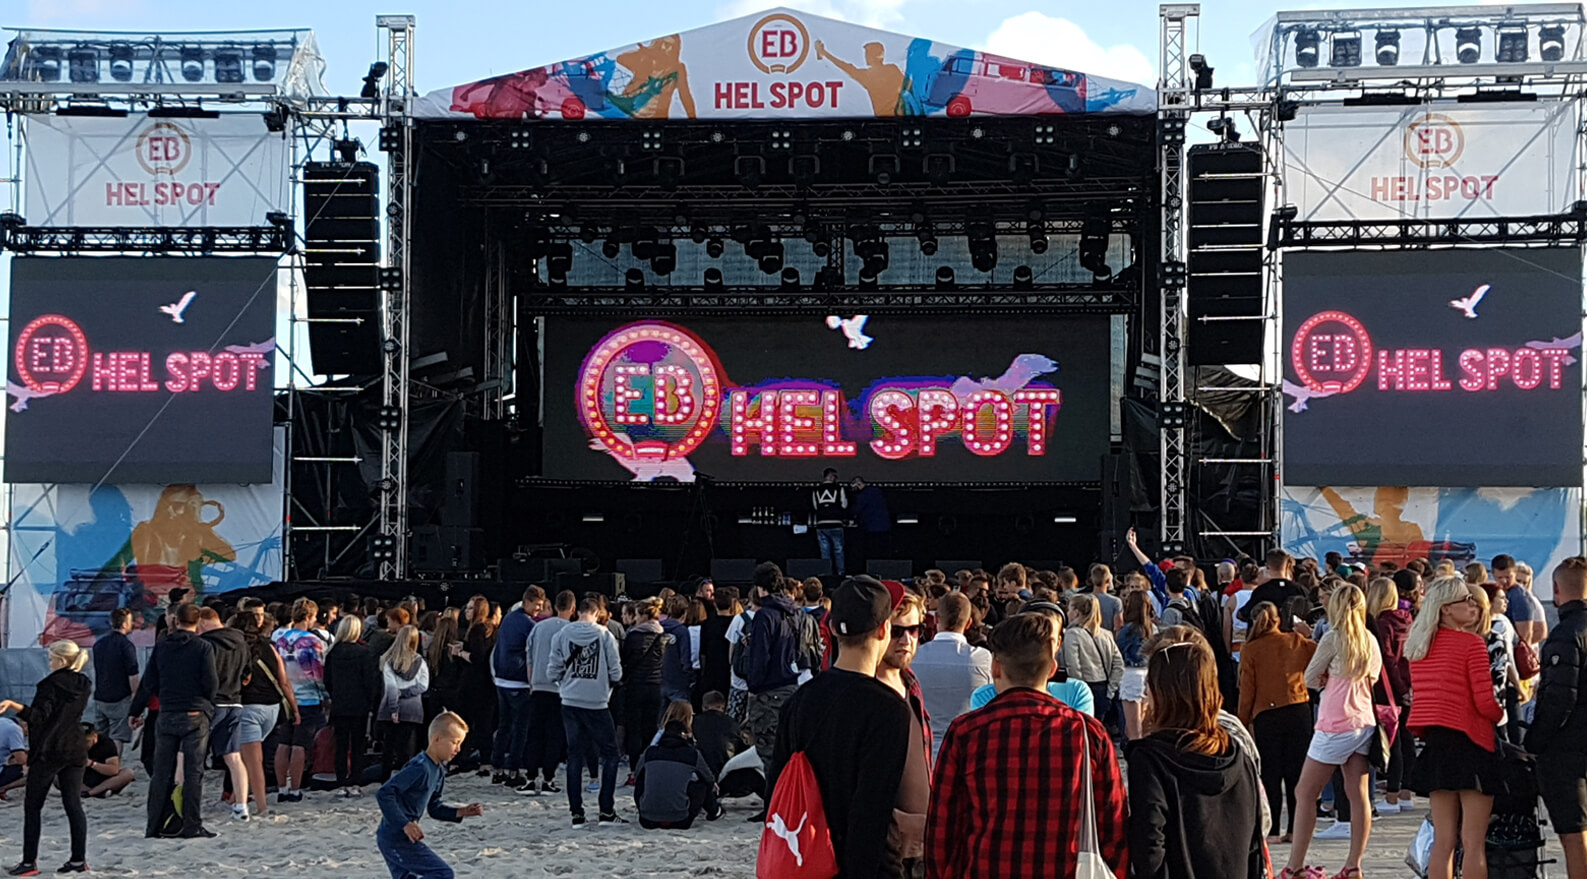 EB hell spot - EB Hel Spot Festival - logo and letters with bulbs placed over the stage